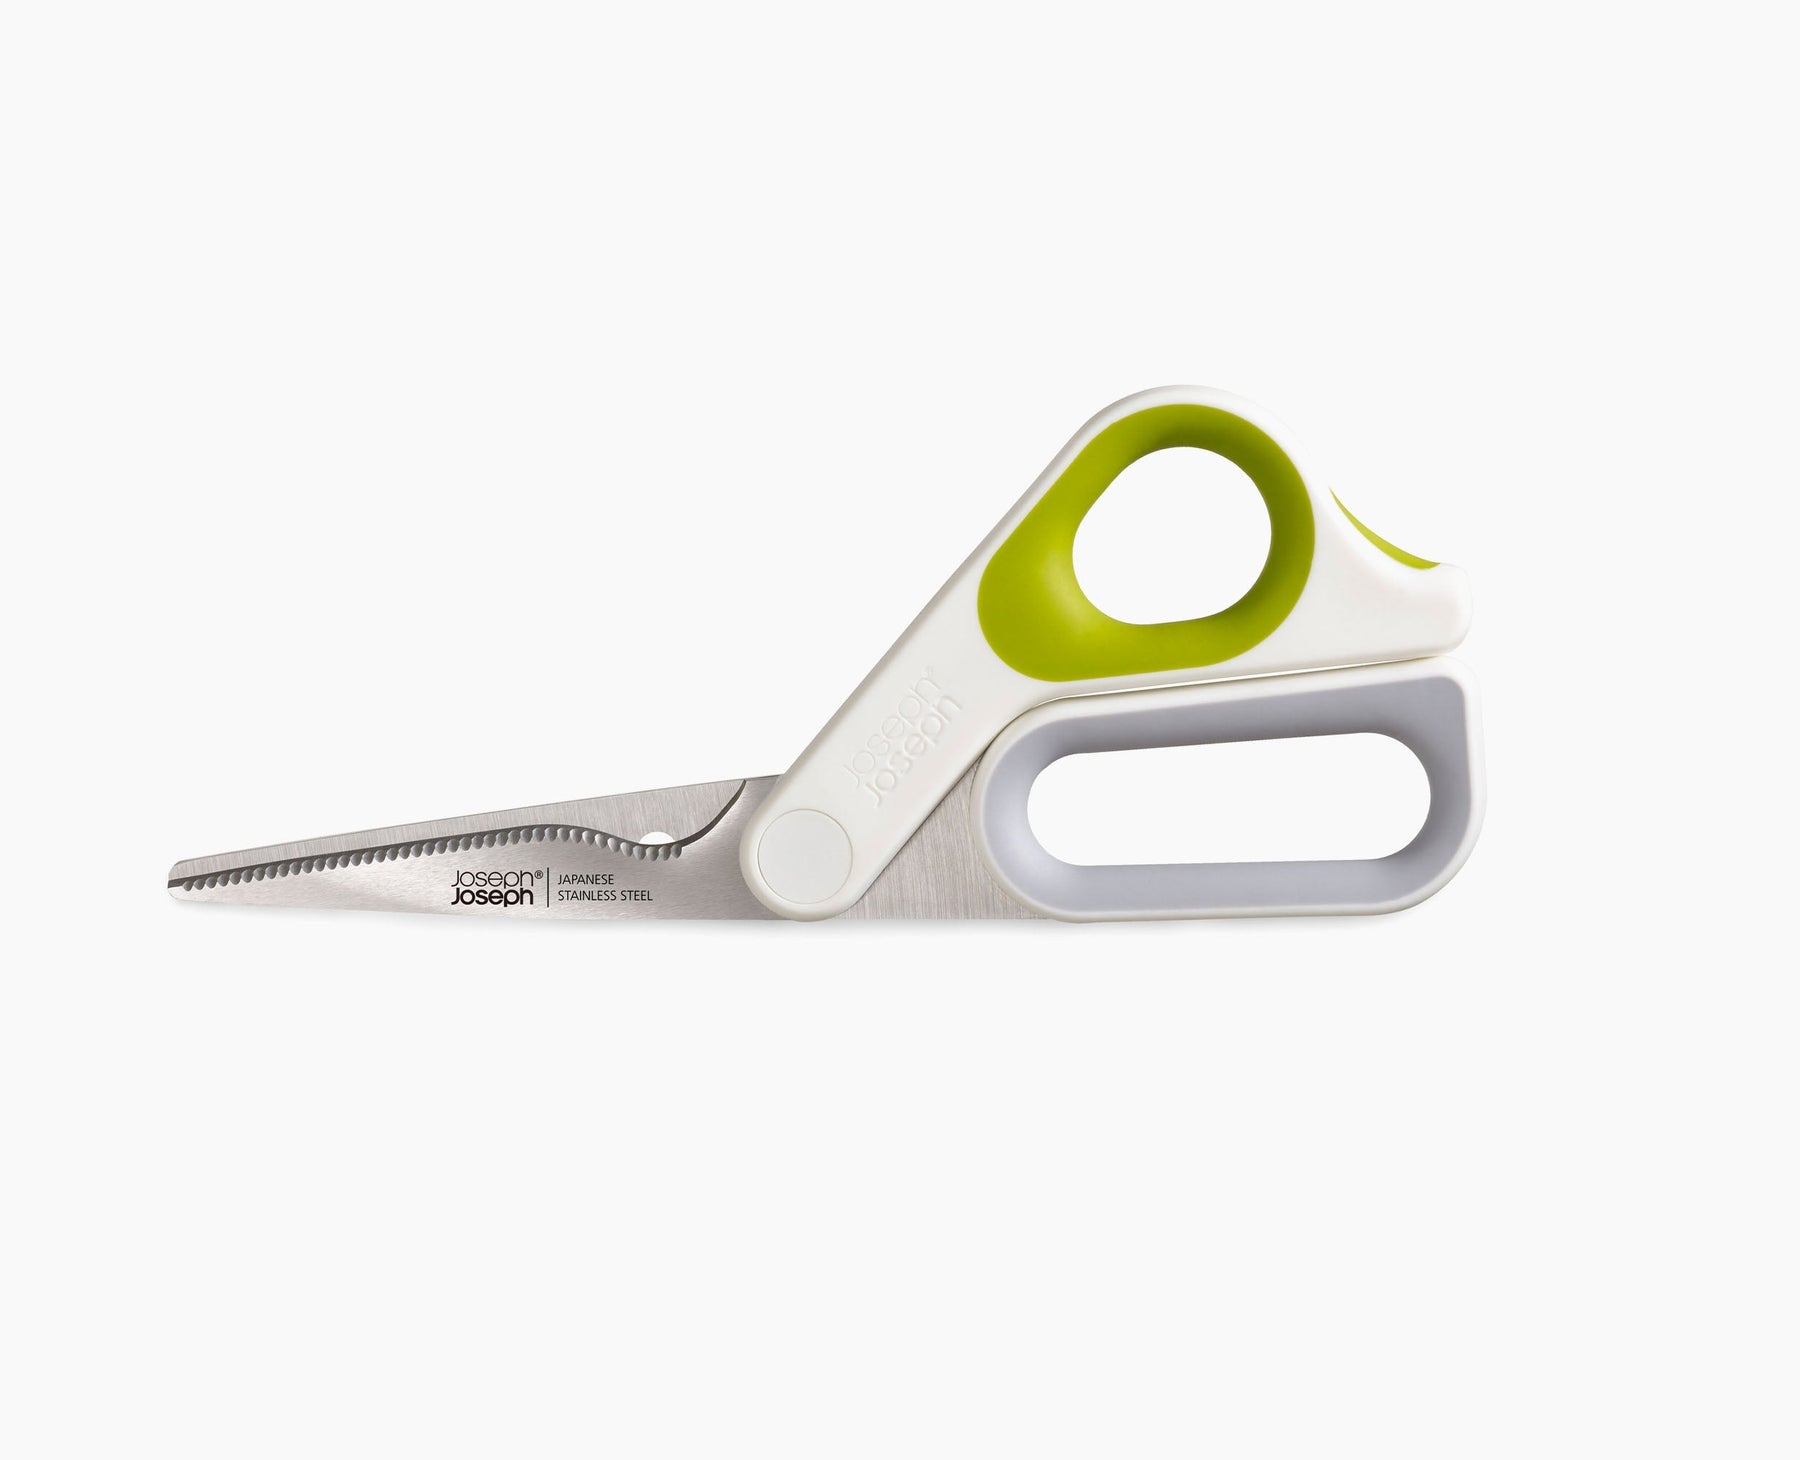 Met Lux Herb Scissors - with 5 Blades - 7 1/2 inch - 1 Count Box, Green